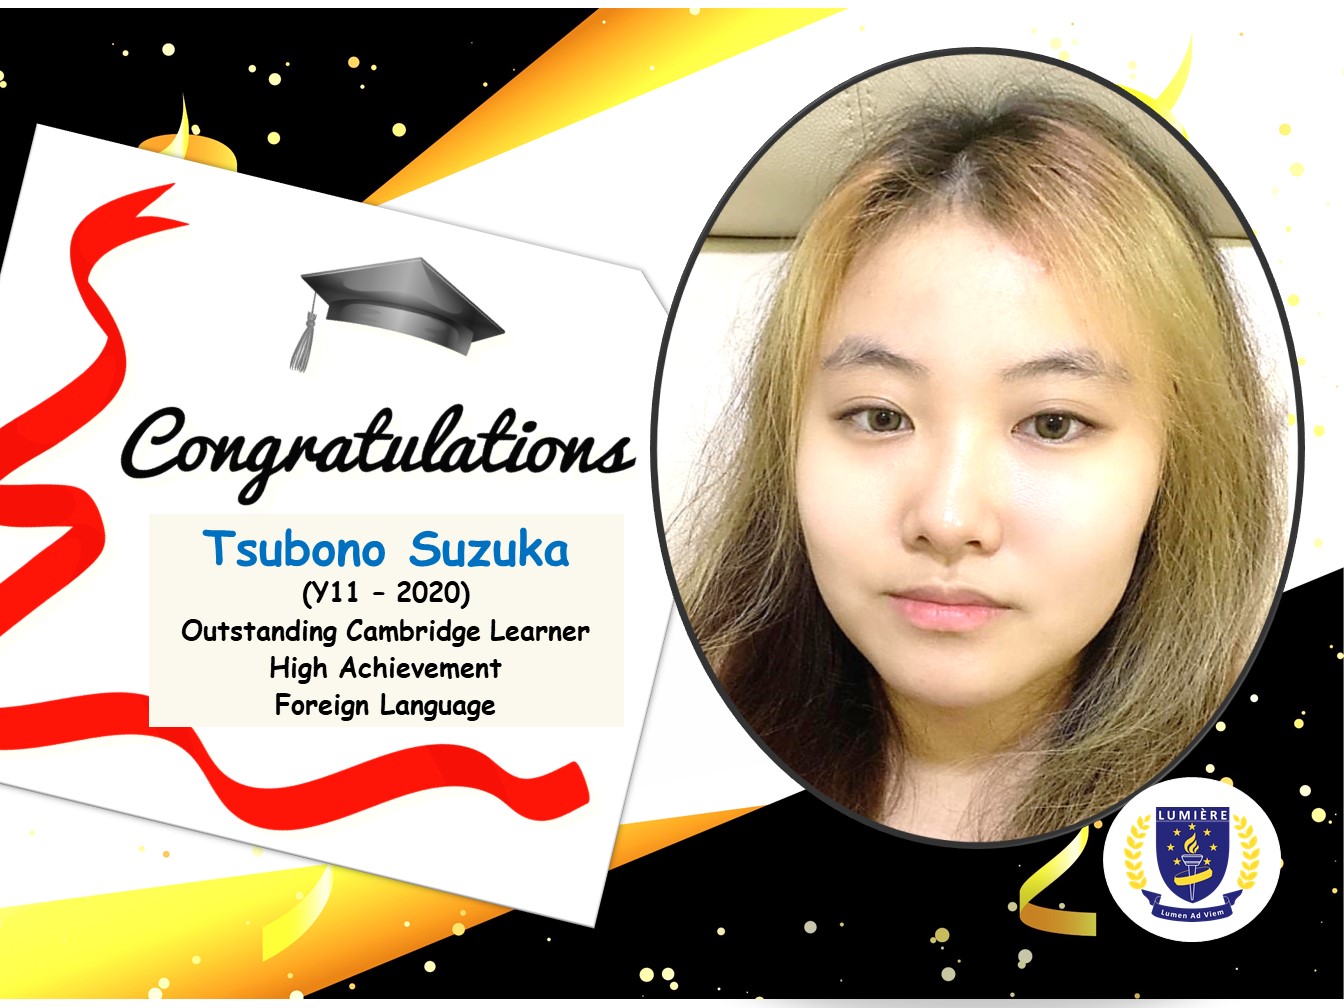 505-outstanding-cambridge-learner-from-lumiere-academy-homeschool-centre.jpg